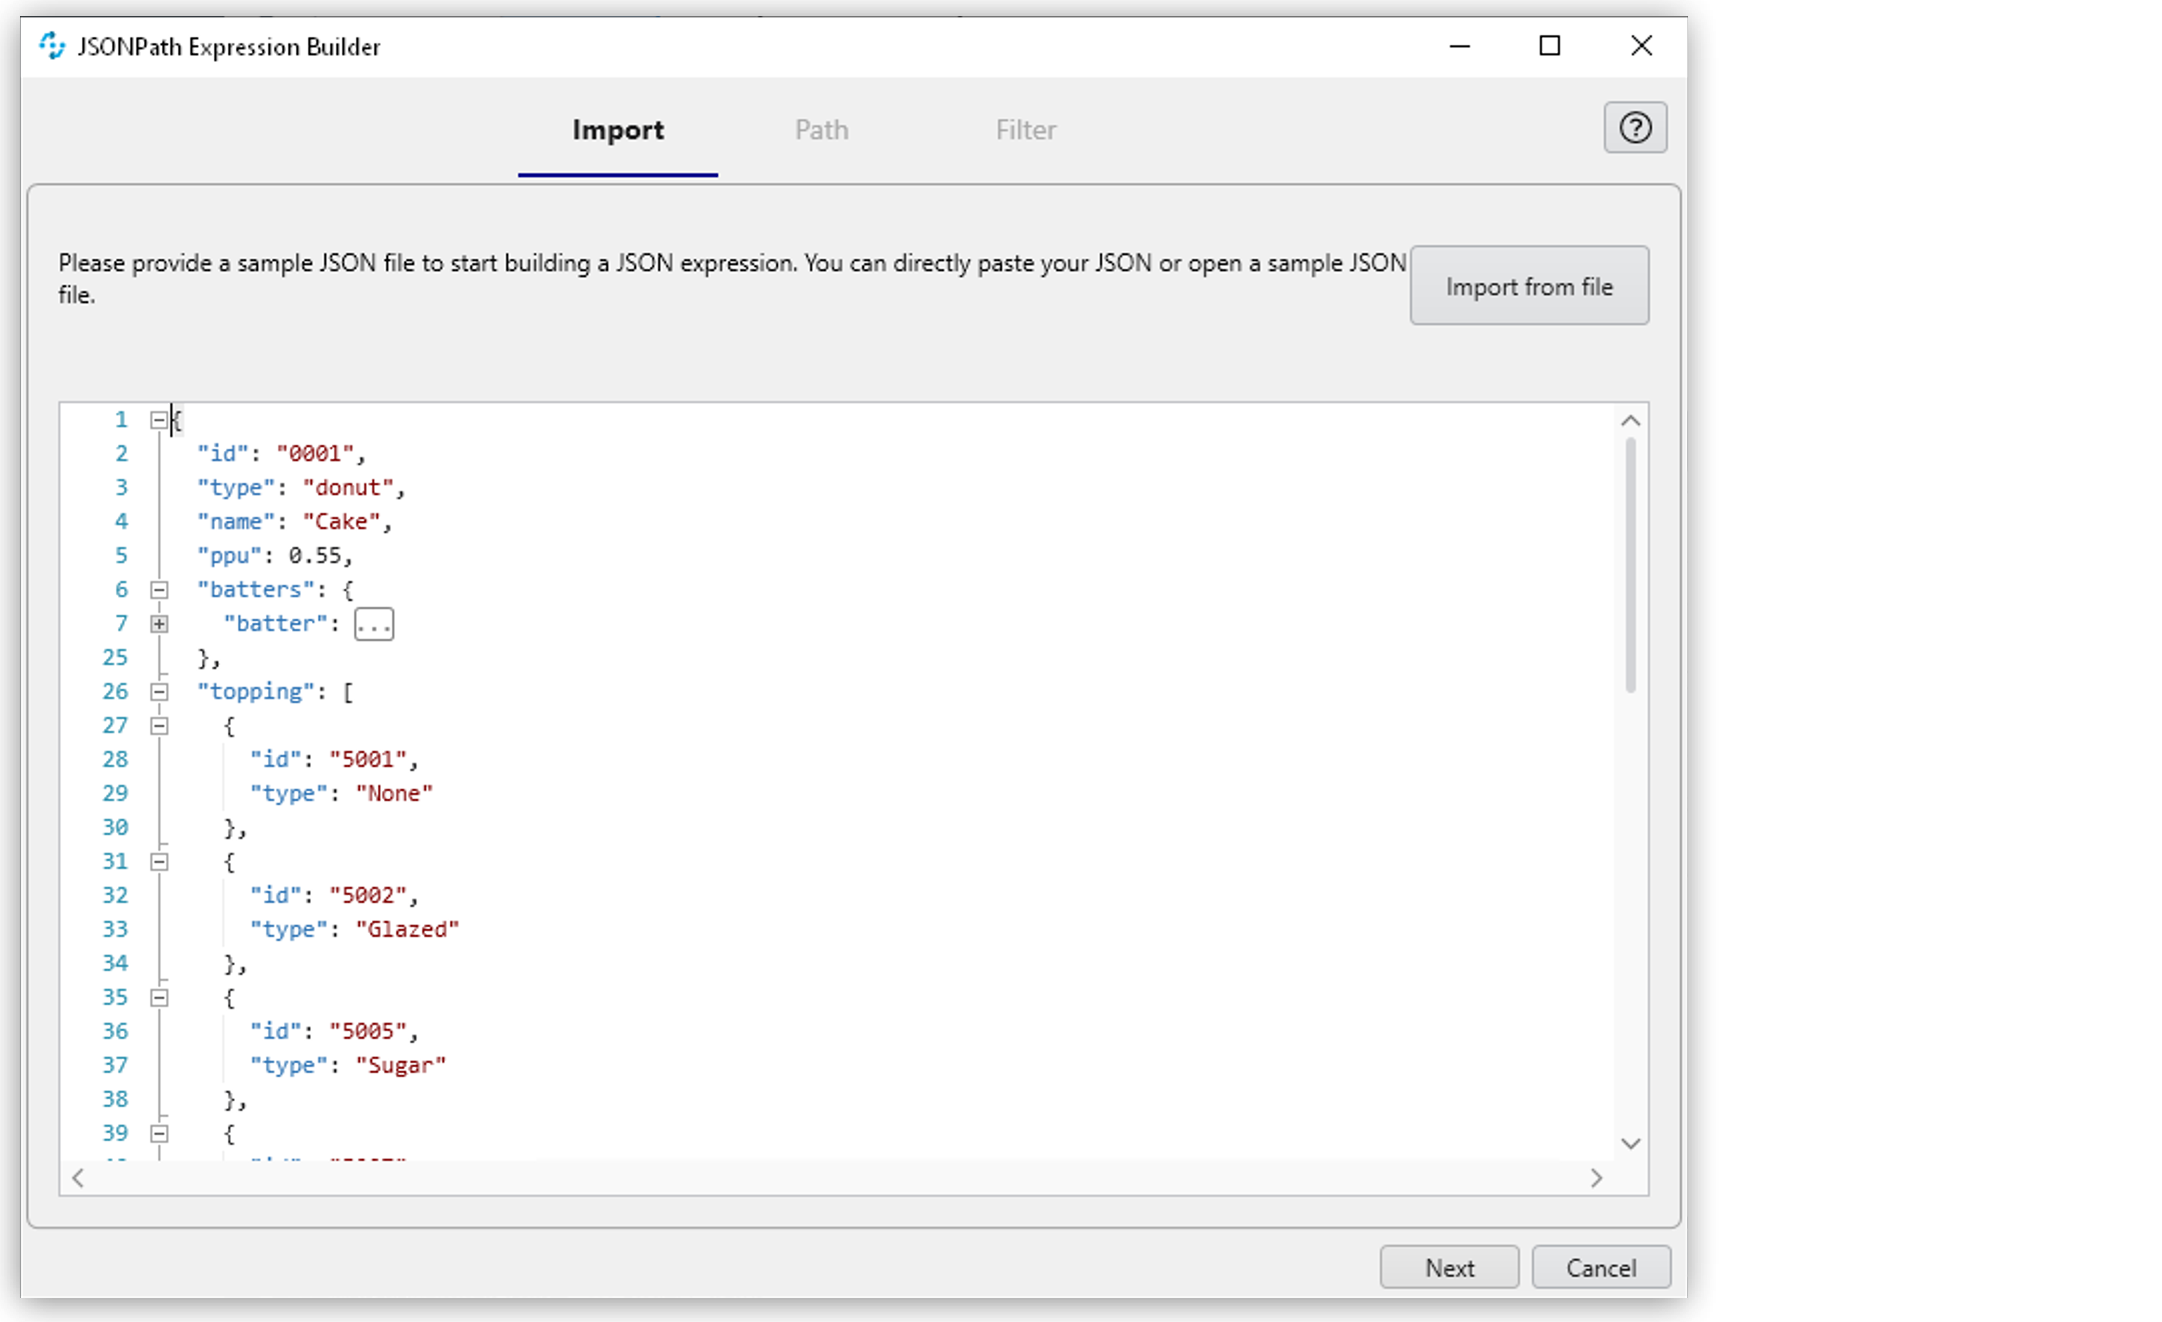 The import file window of the JSONPath Expression Builder tool.